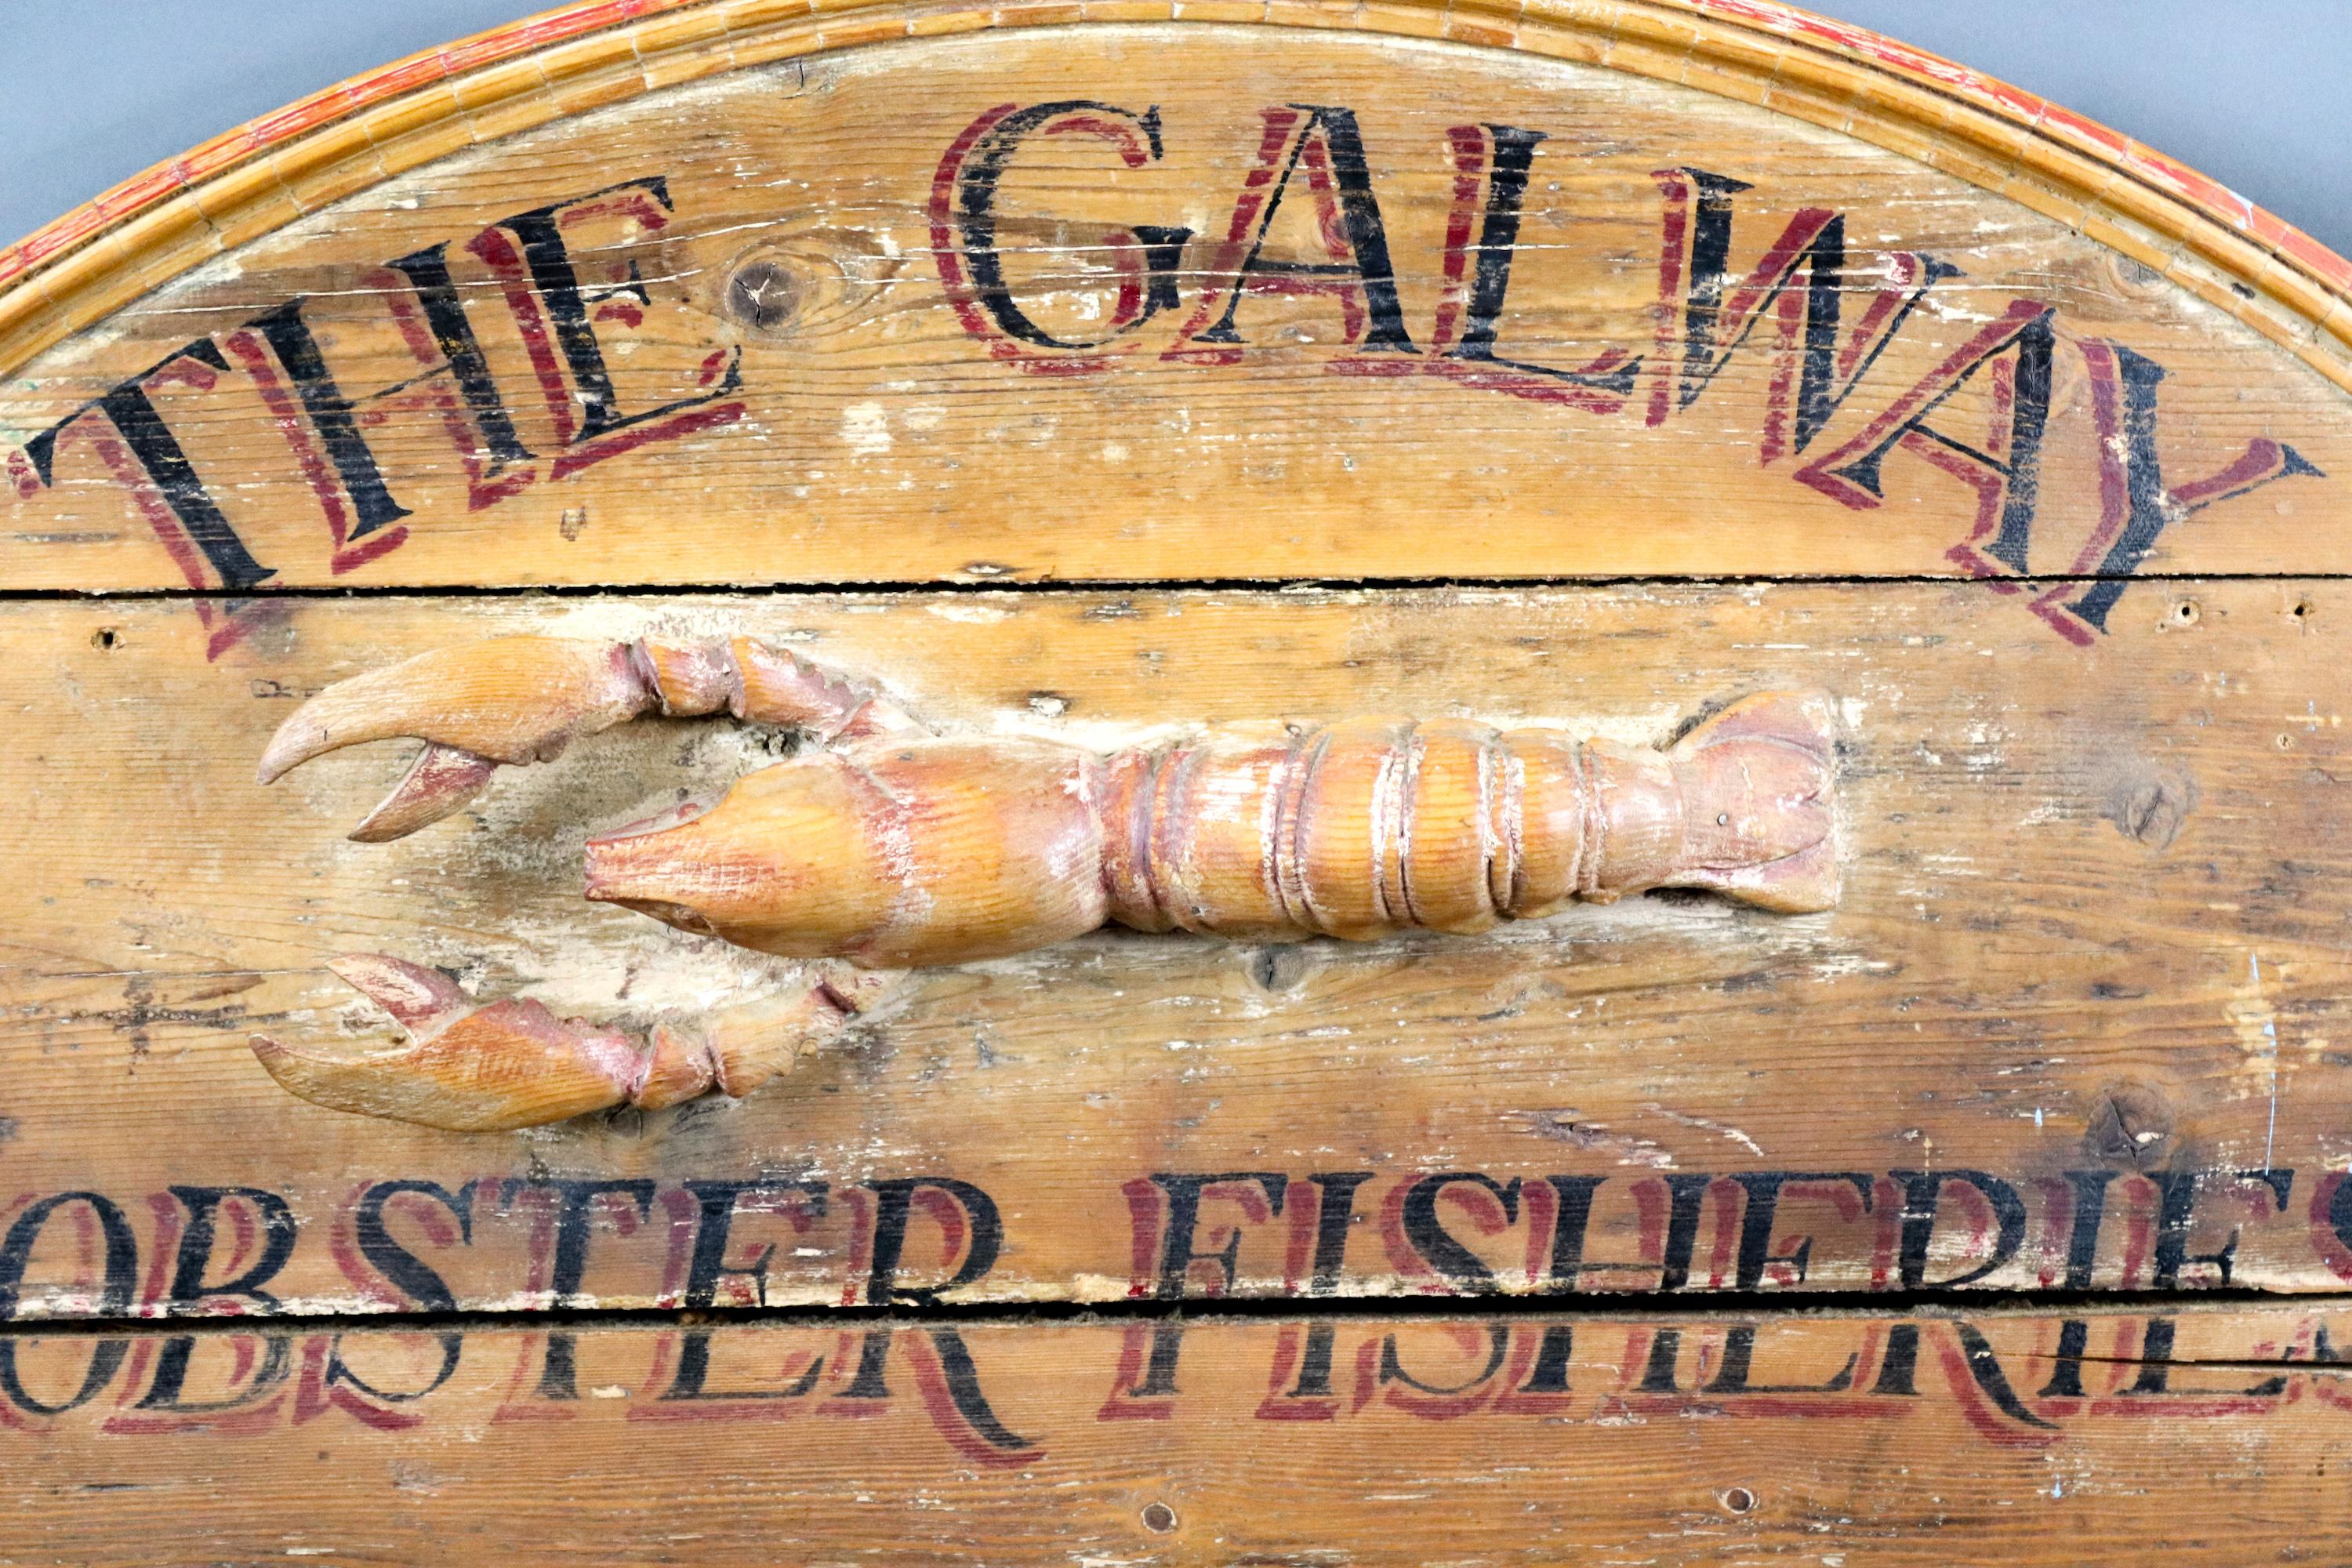 The Galway Lobster Fisheries trade sign with carved lobster and arched top. Measures: 39